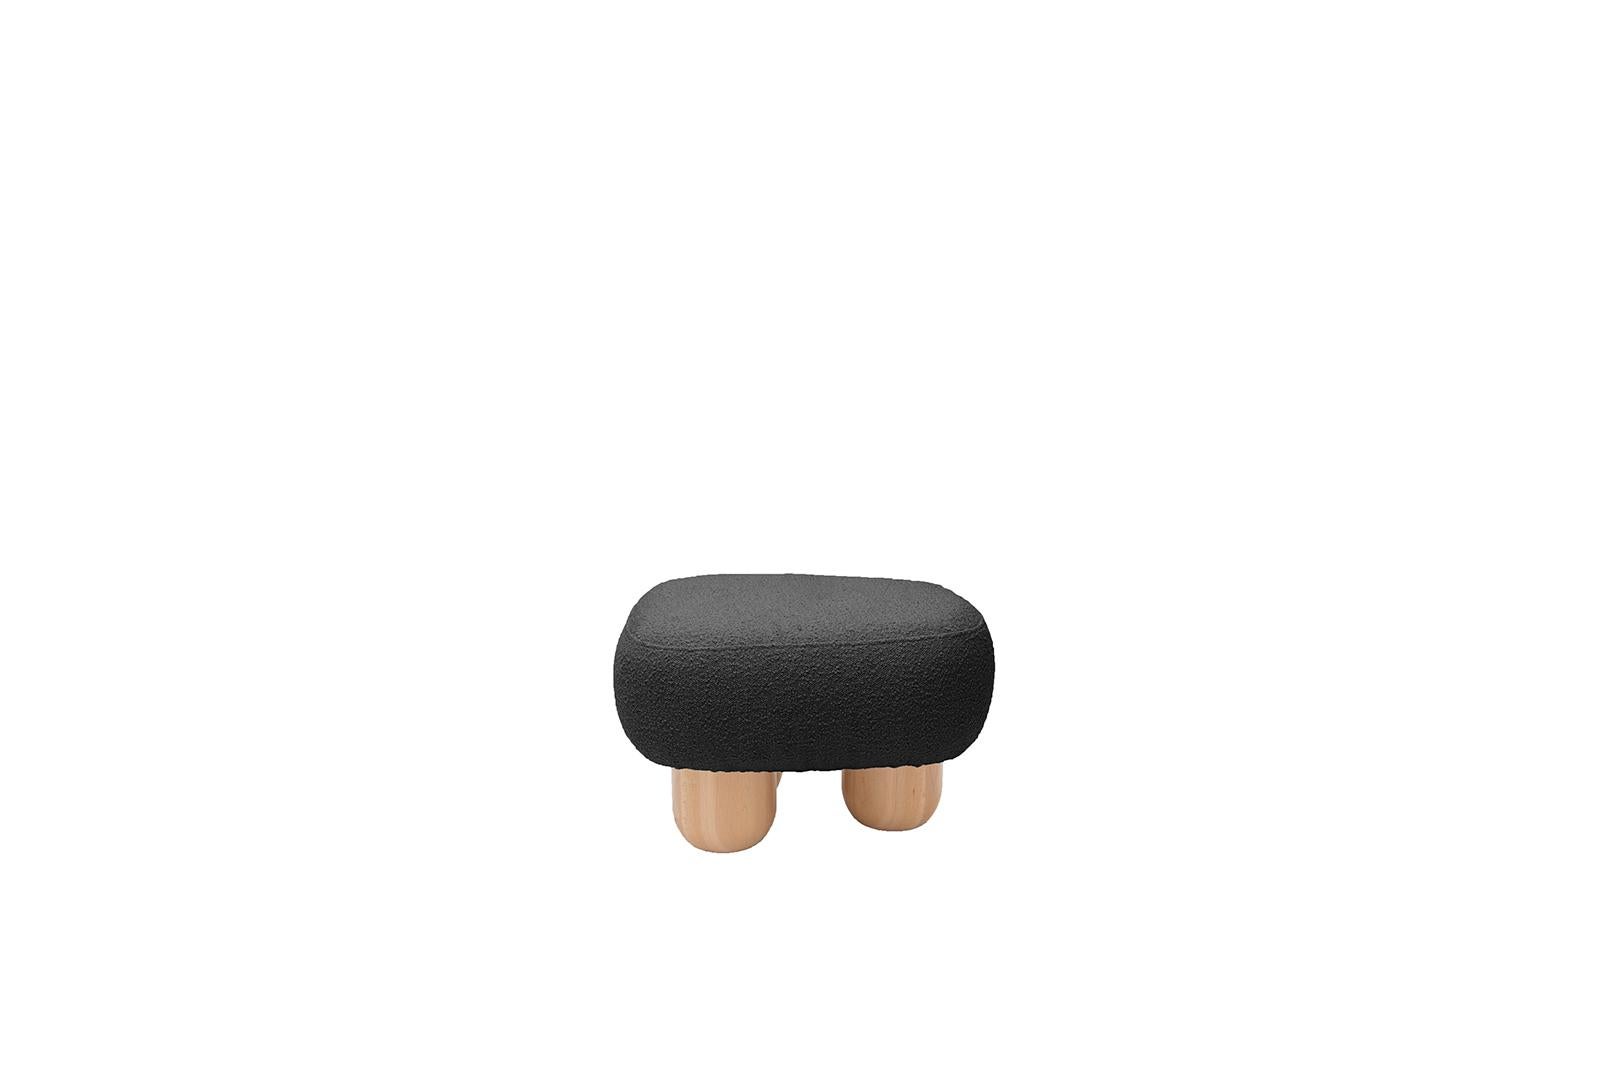 Object 049 Graphite Pouf by NG Design
Dimensions: D64 x W51 x H41 cm
Materials: Boucle upholstery, Solid Oak

Also Available: All of objects available in different materials and colors on demand. 

Will you use the object049 pouf as an